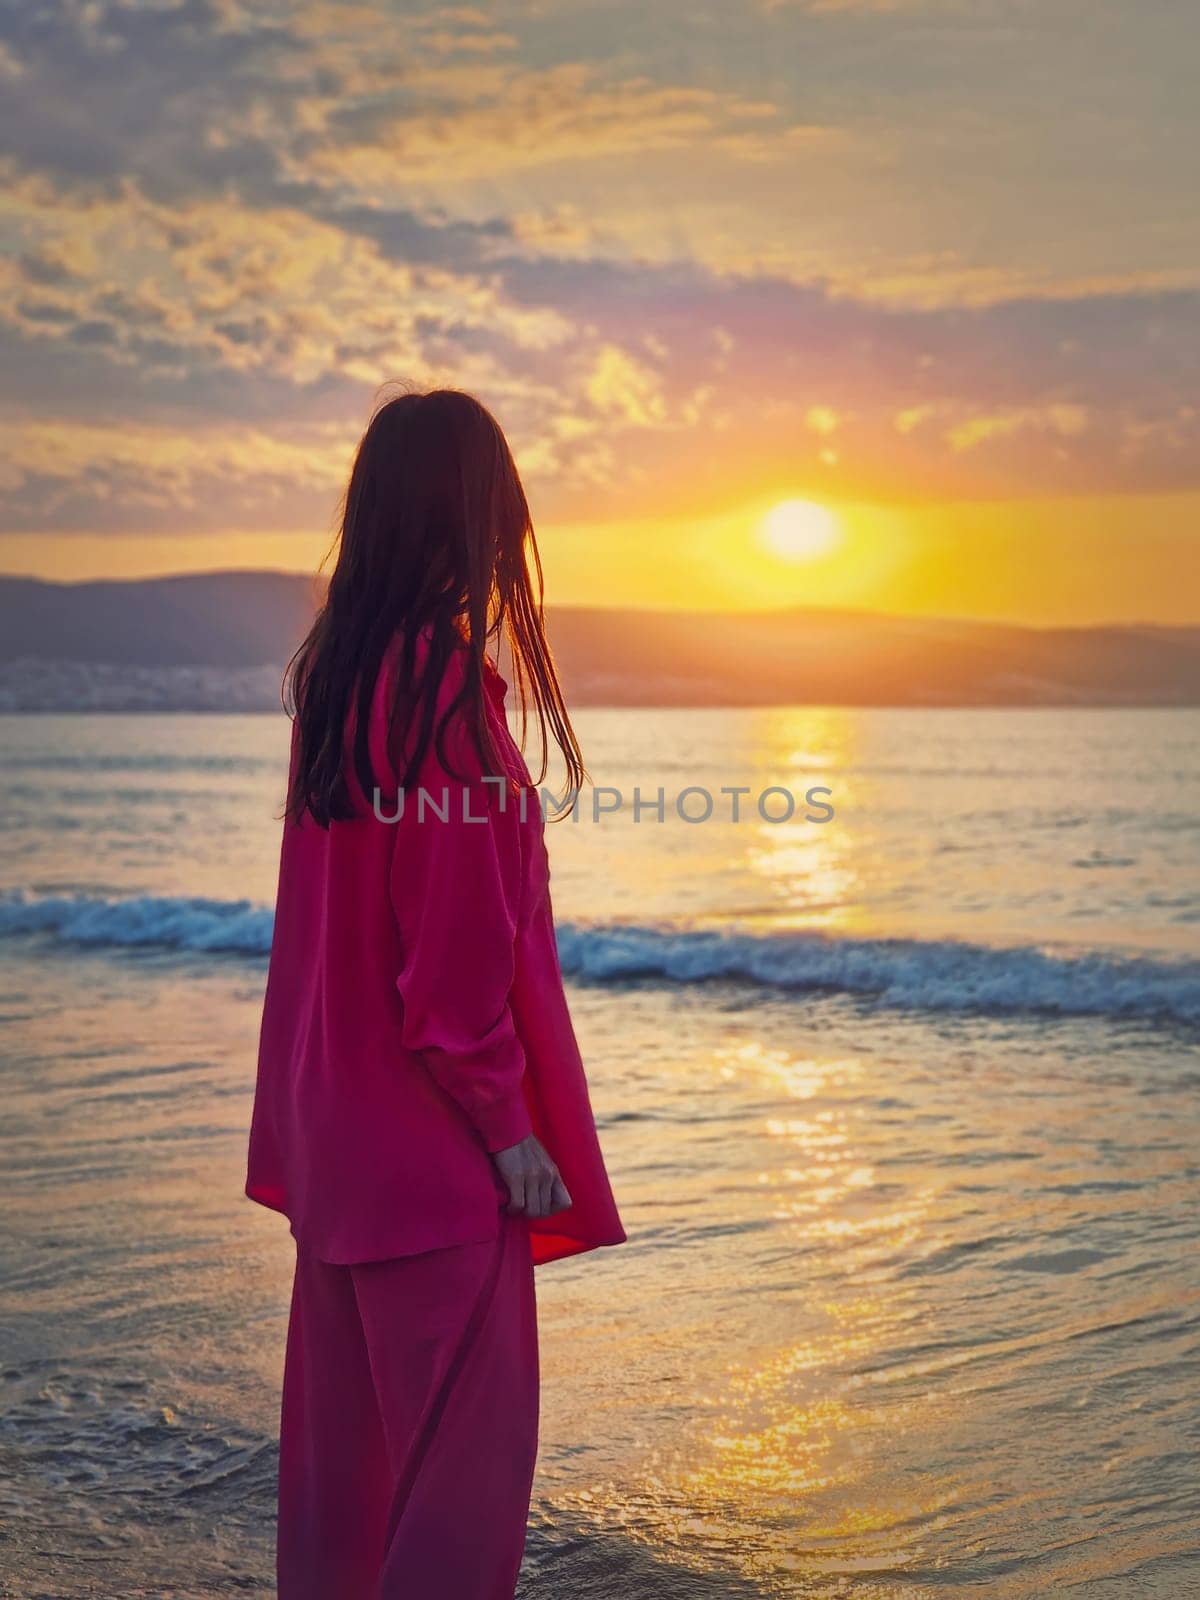 Aesthetic young woman rear view watching the sunrise above the hills at the sea. Beautiful dawn scene, summer holiday background by psychoshadow